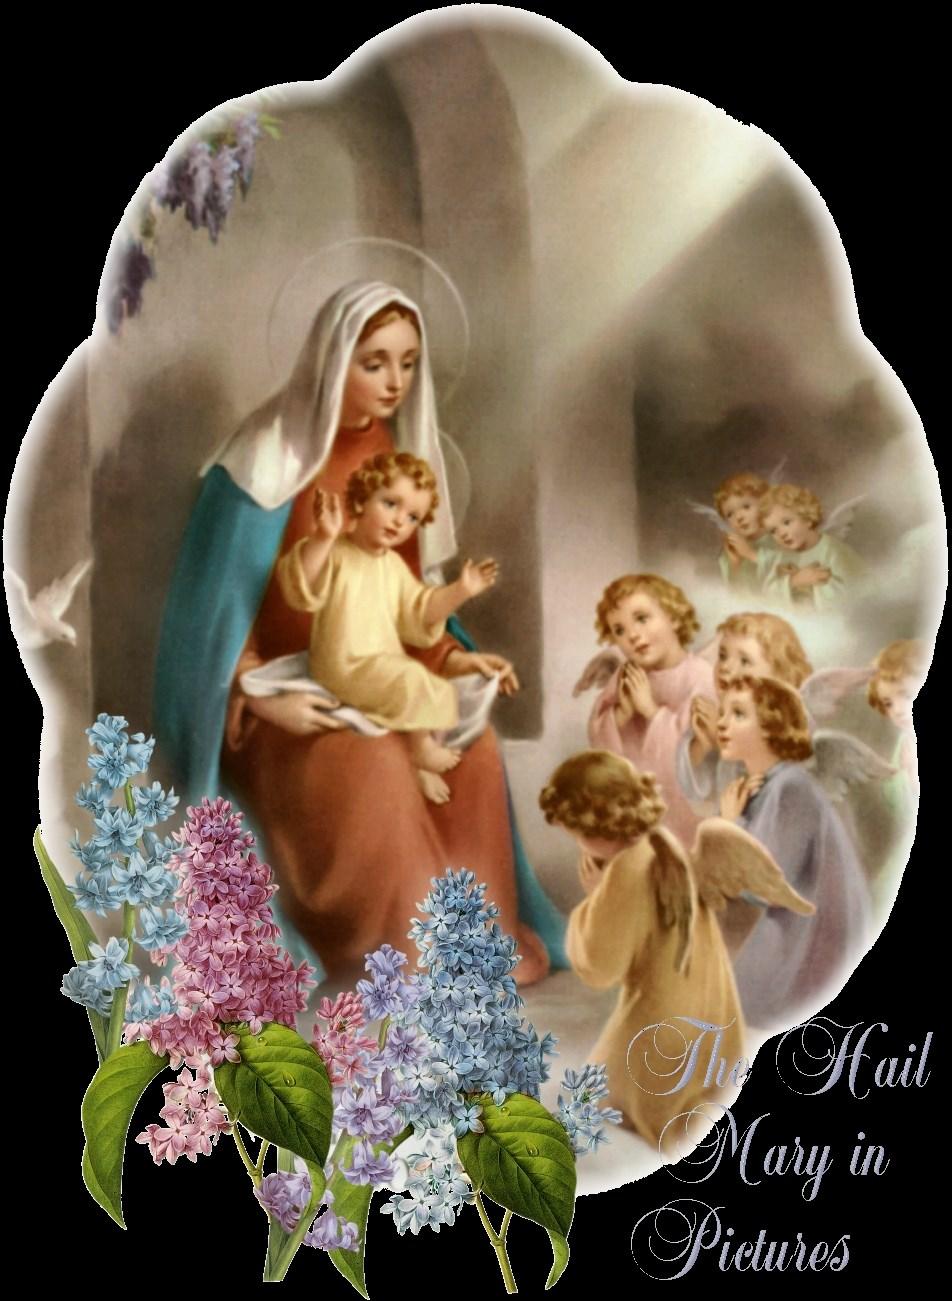 Hail Mary Full of grace. the Lord is with Thee.